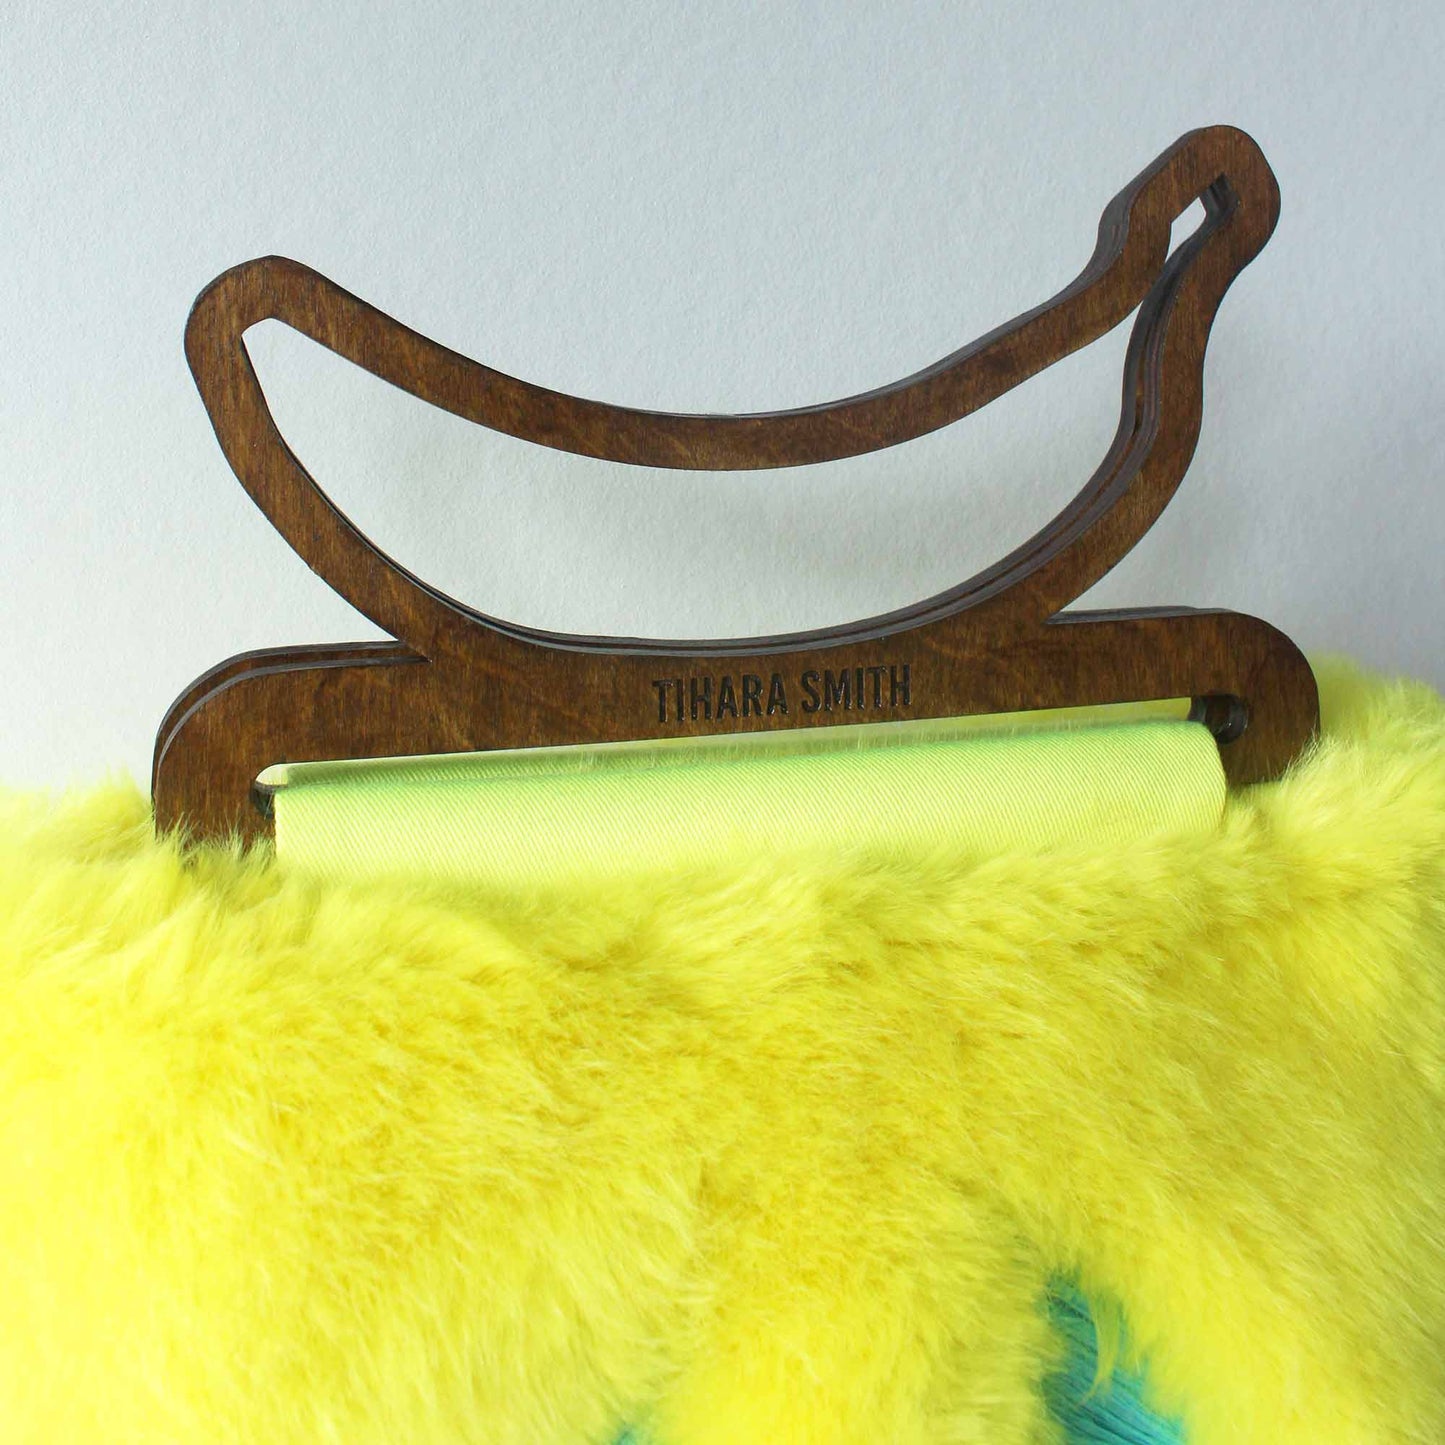 Load image into Gallery viewer, Mandeville Faux Fur Banana Handle Bag - Yellow and Blue
